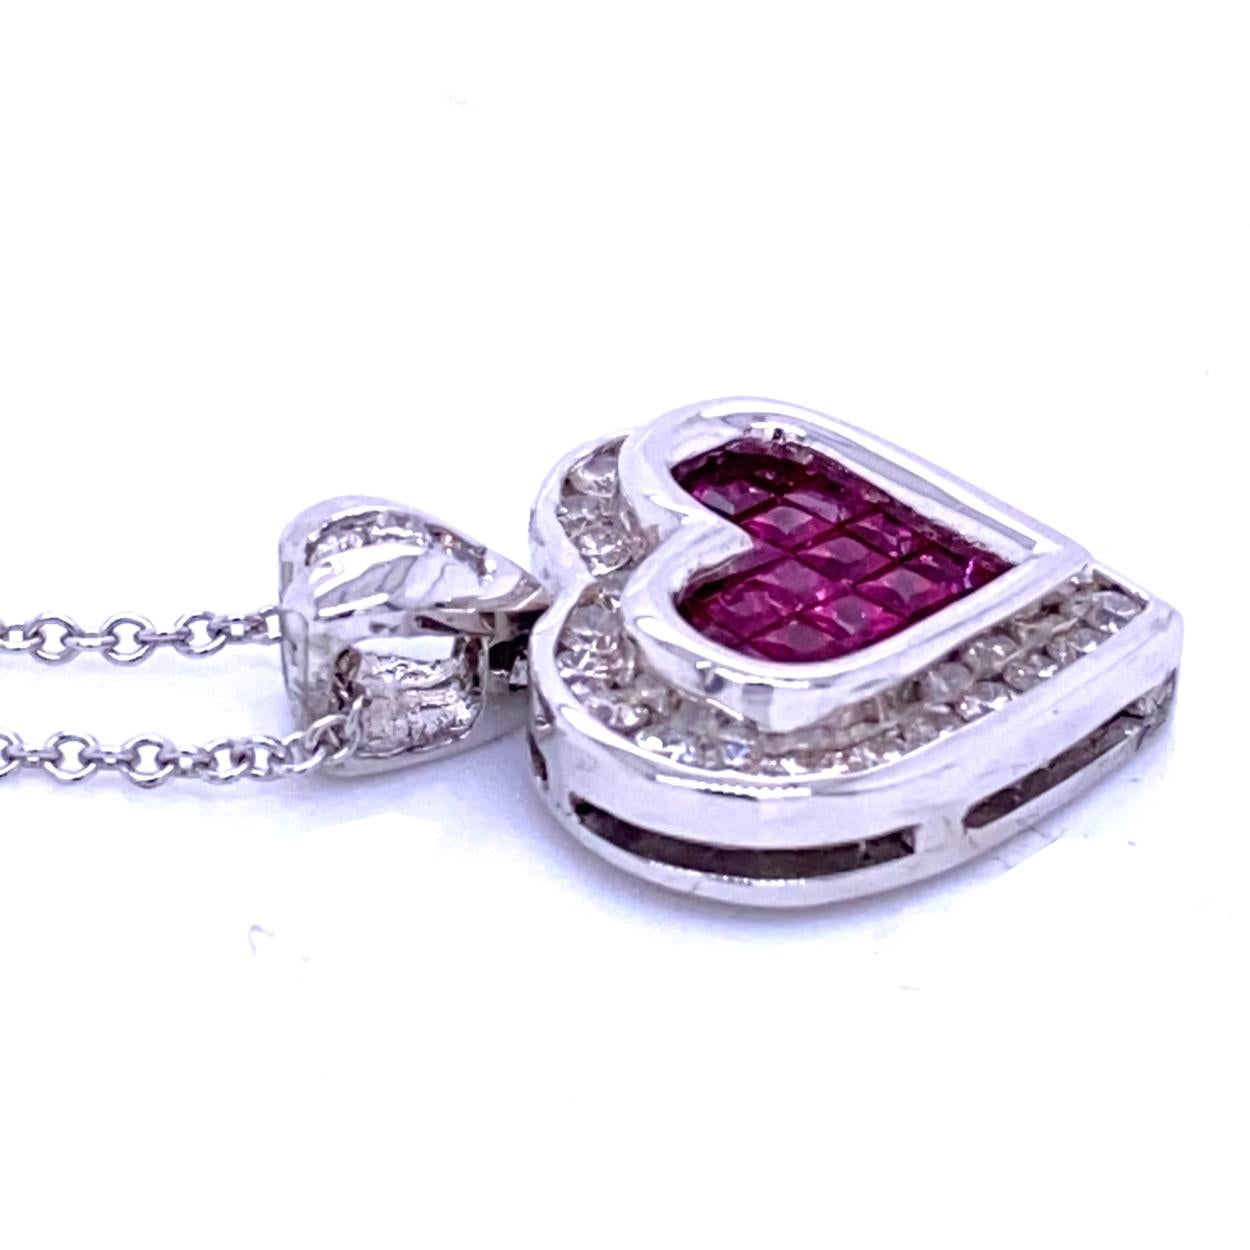 0.51 Carat Diamond/1.05 Carat Ruby 18 Karat Gold Hearts Pendant Necklace In New Condition For Sale In Los Angeles, CA